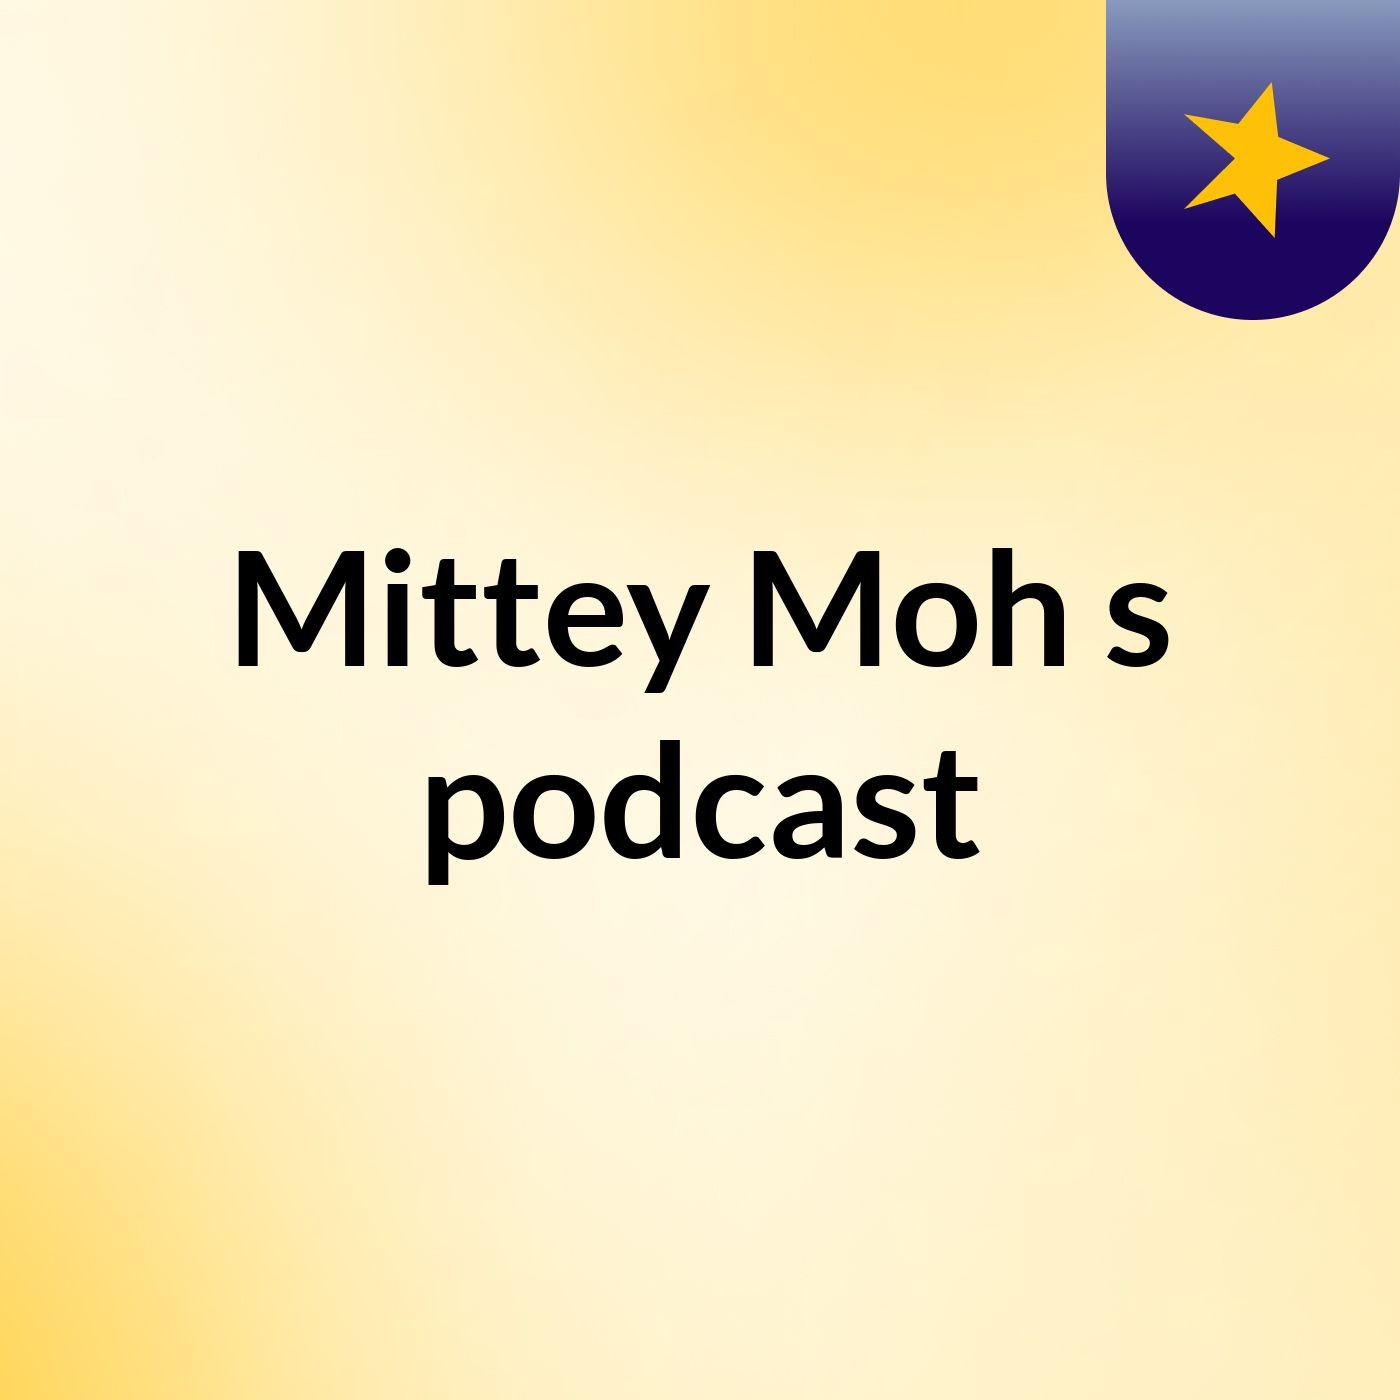 Mittey Moh's podcast